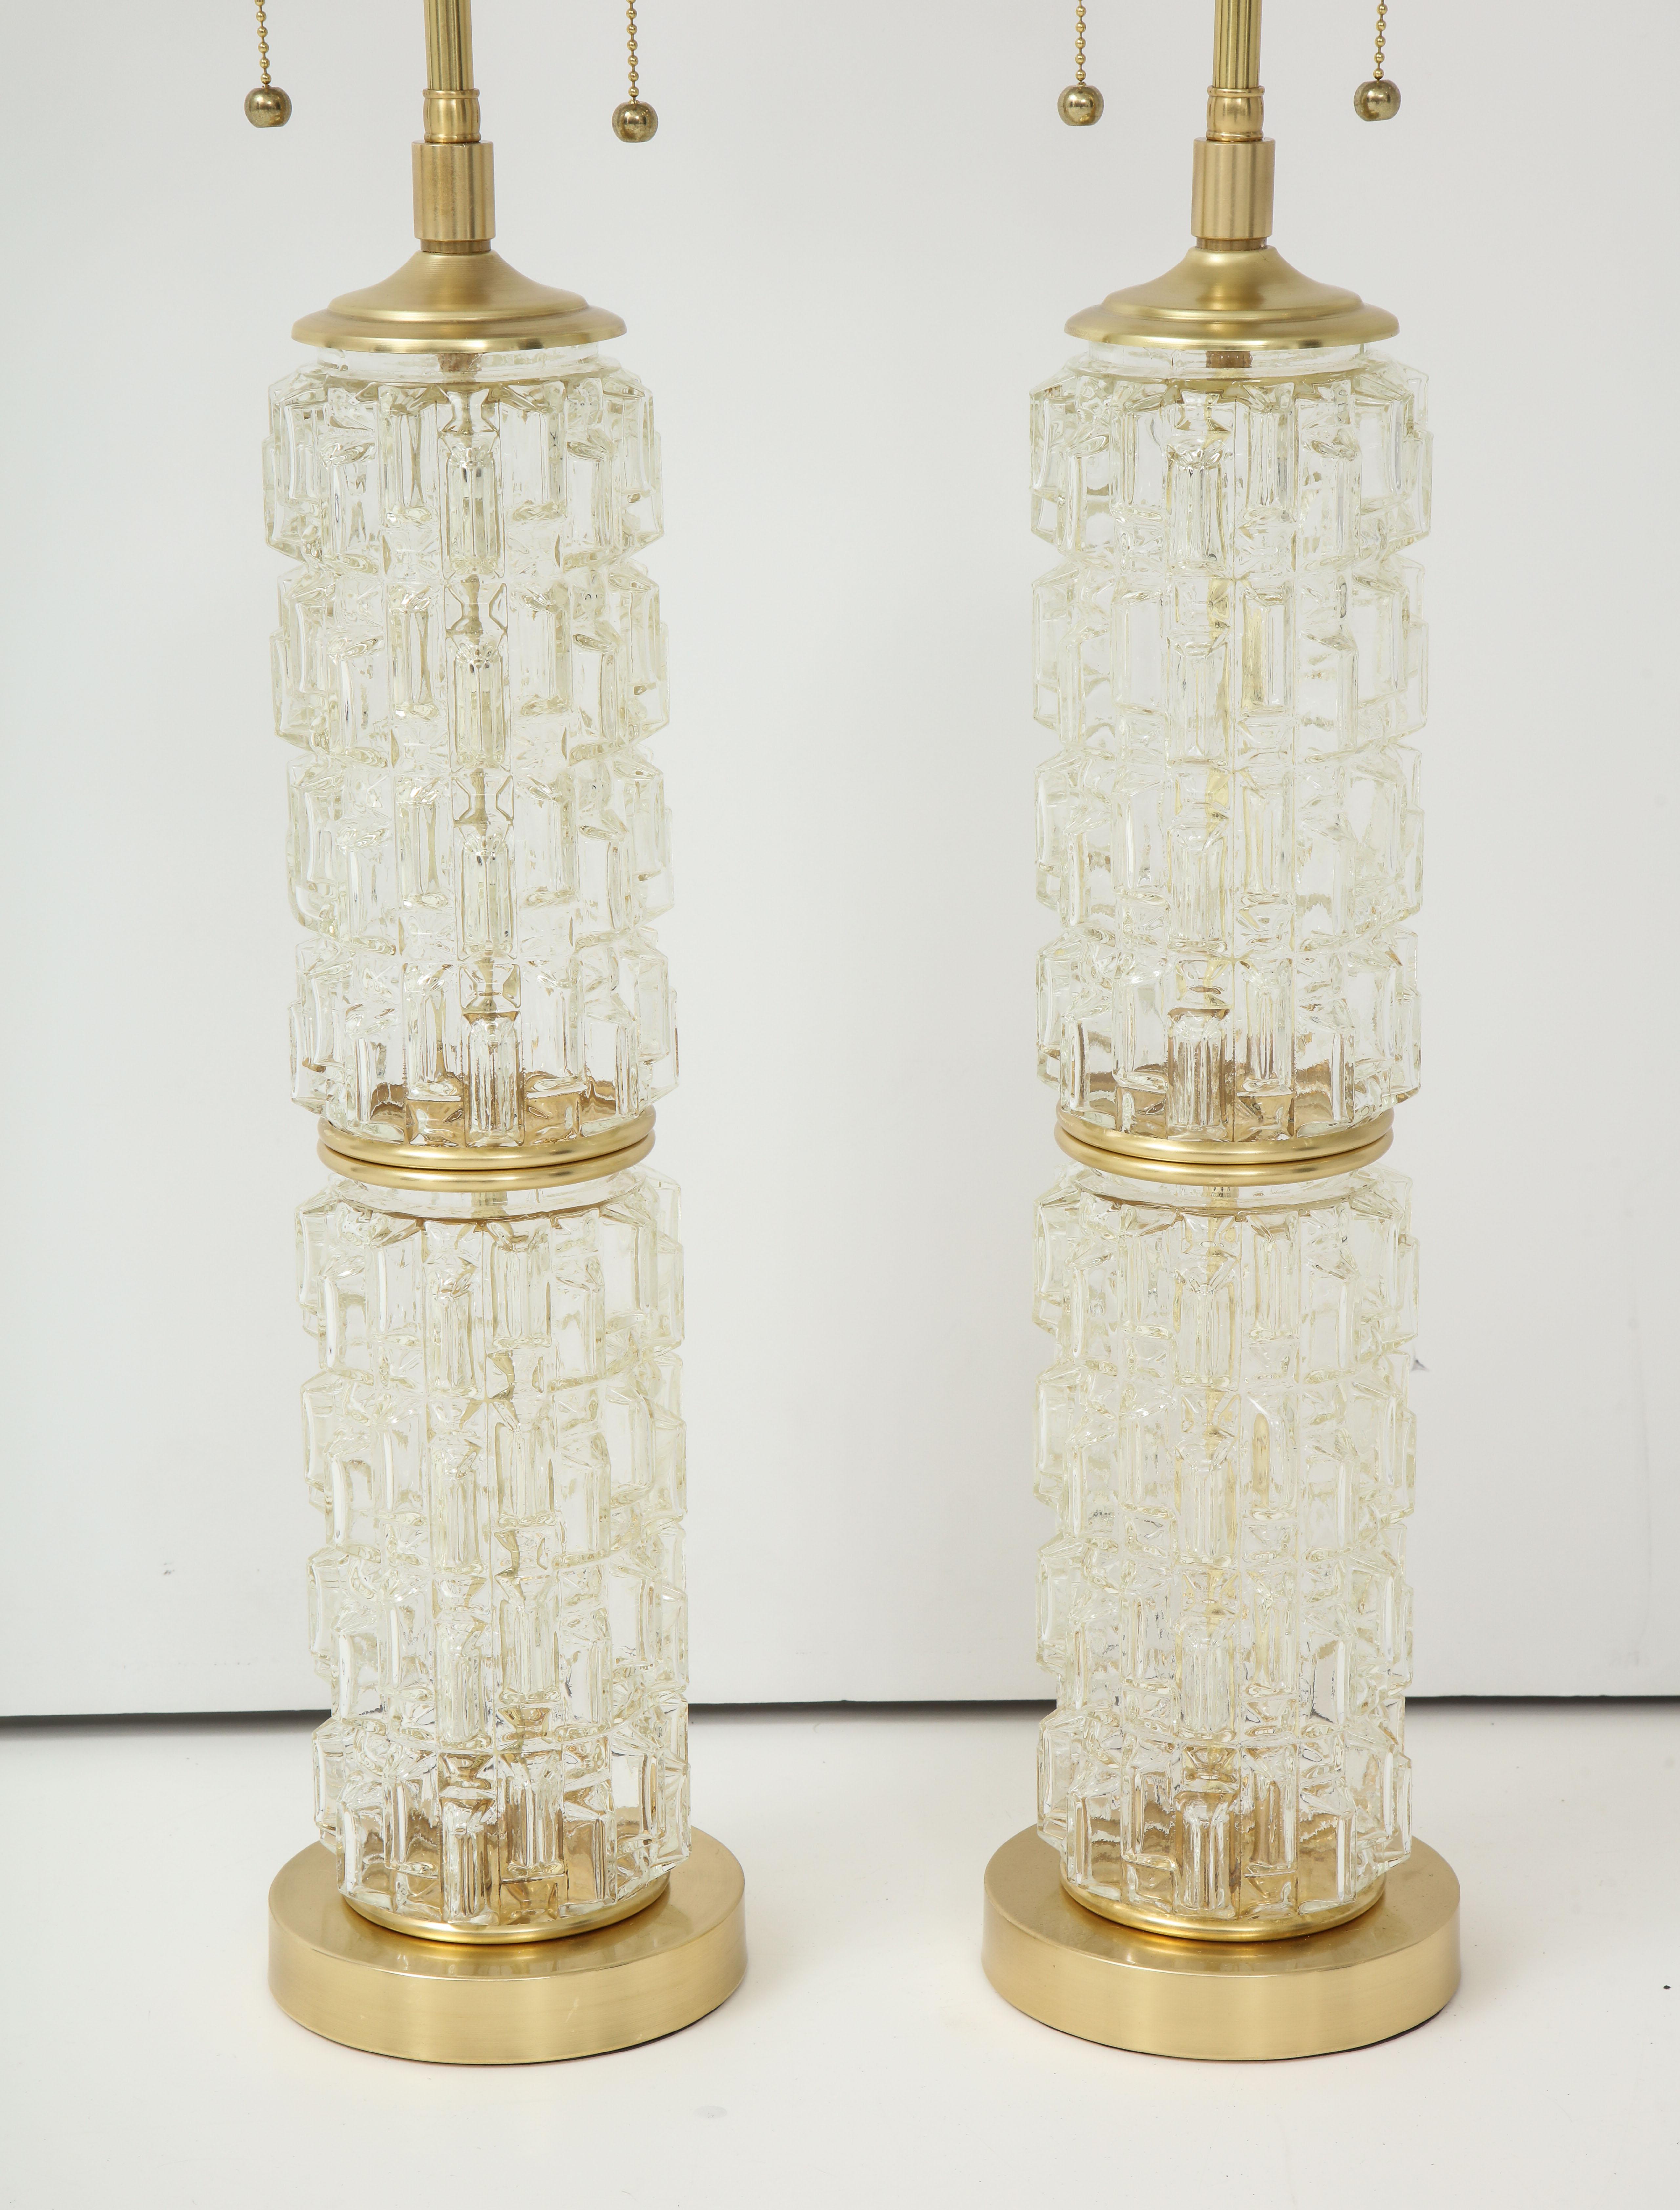 Pair of 1970s faceted cut glass lamps with polished brass hardware.
The lamps have been newly rewired with polished brass double clusters.